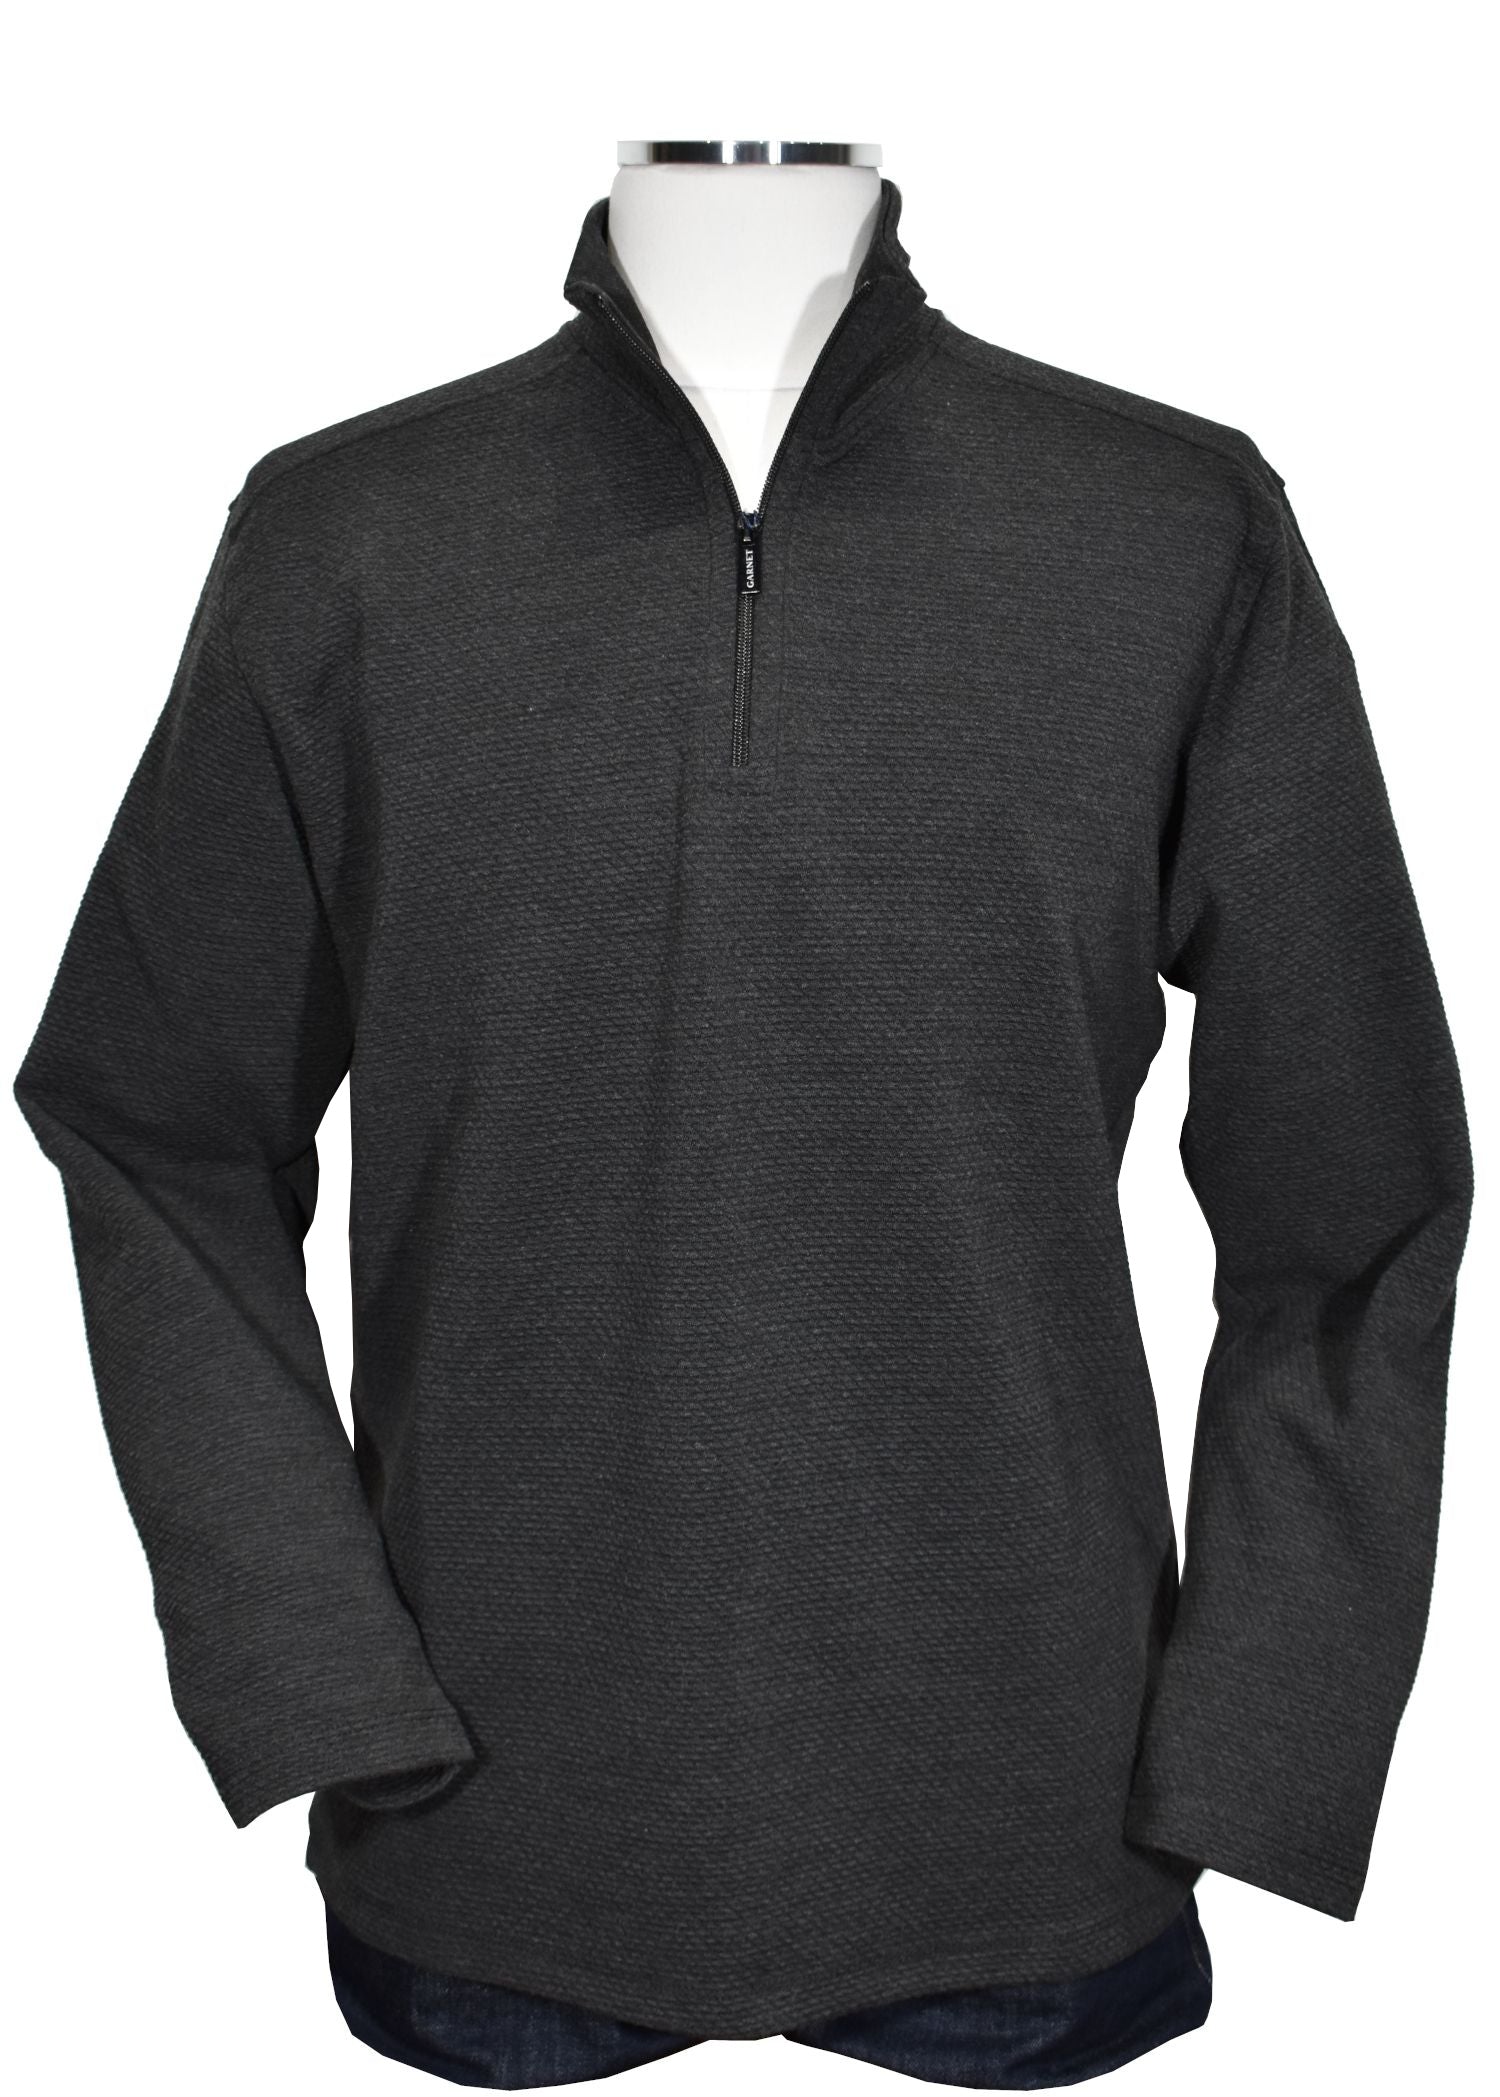 Feel luxurious and cool in this ZA26006 Lux Tech Pullover! Our tech fabric is lightweight yet soft and velvety, and your look will be elevated with its subtle two-color weave and slight contrast. With its classic soft-sided zip mock model and open bottom and sleeve, you'll be sure to make a contemporary statement!